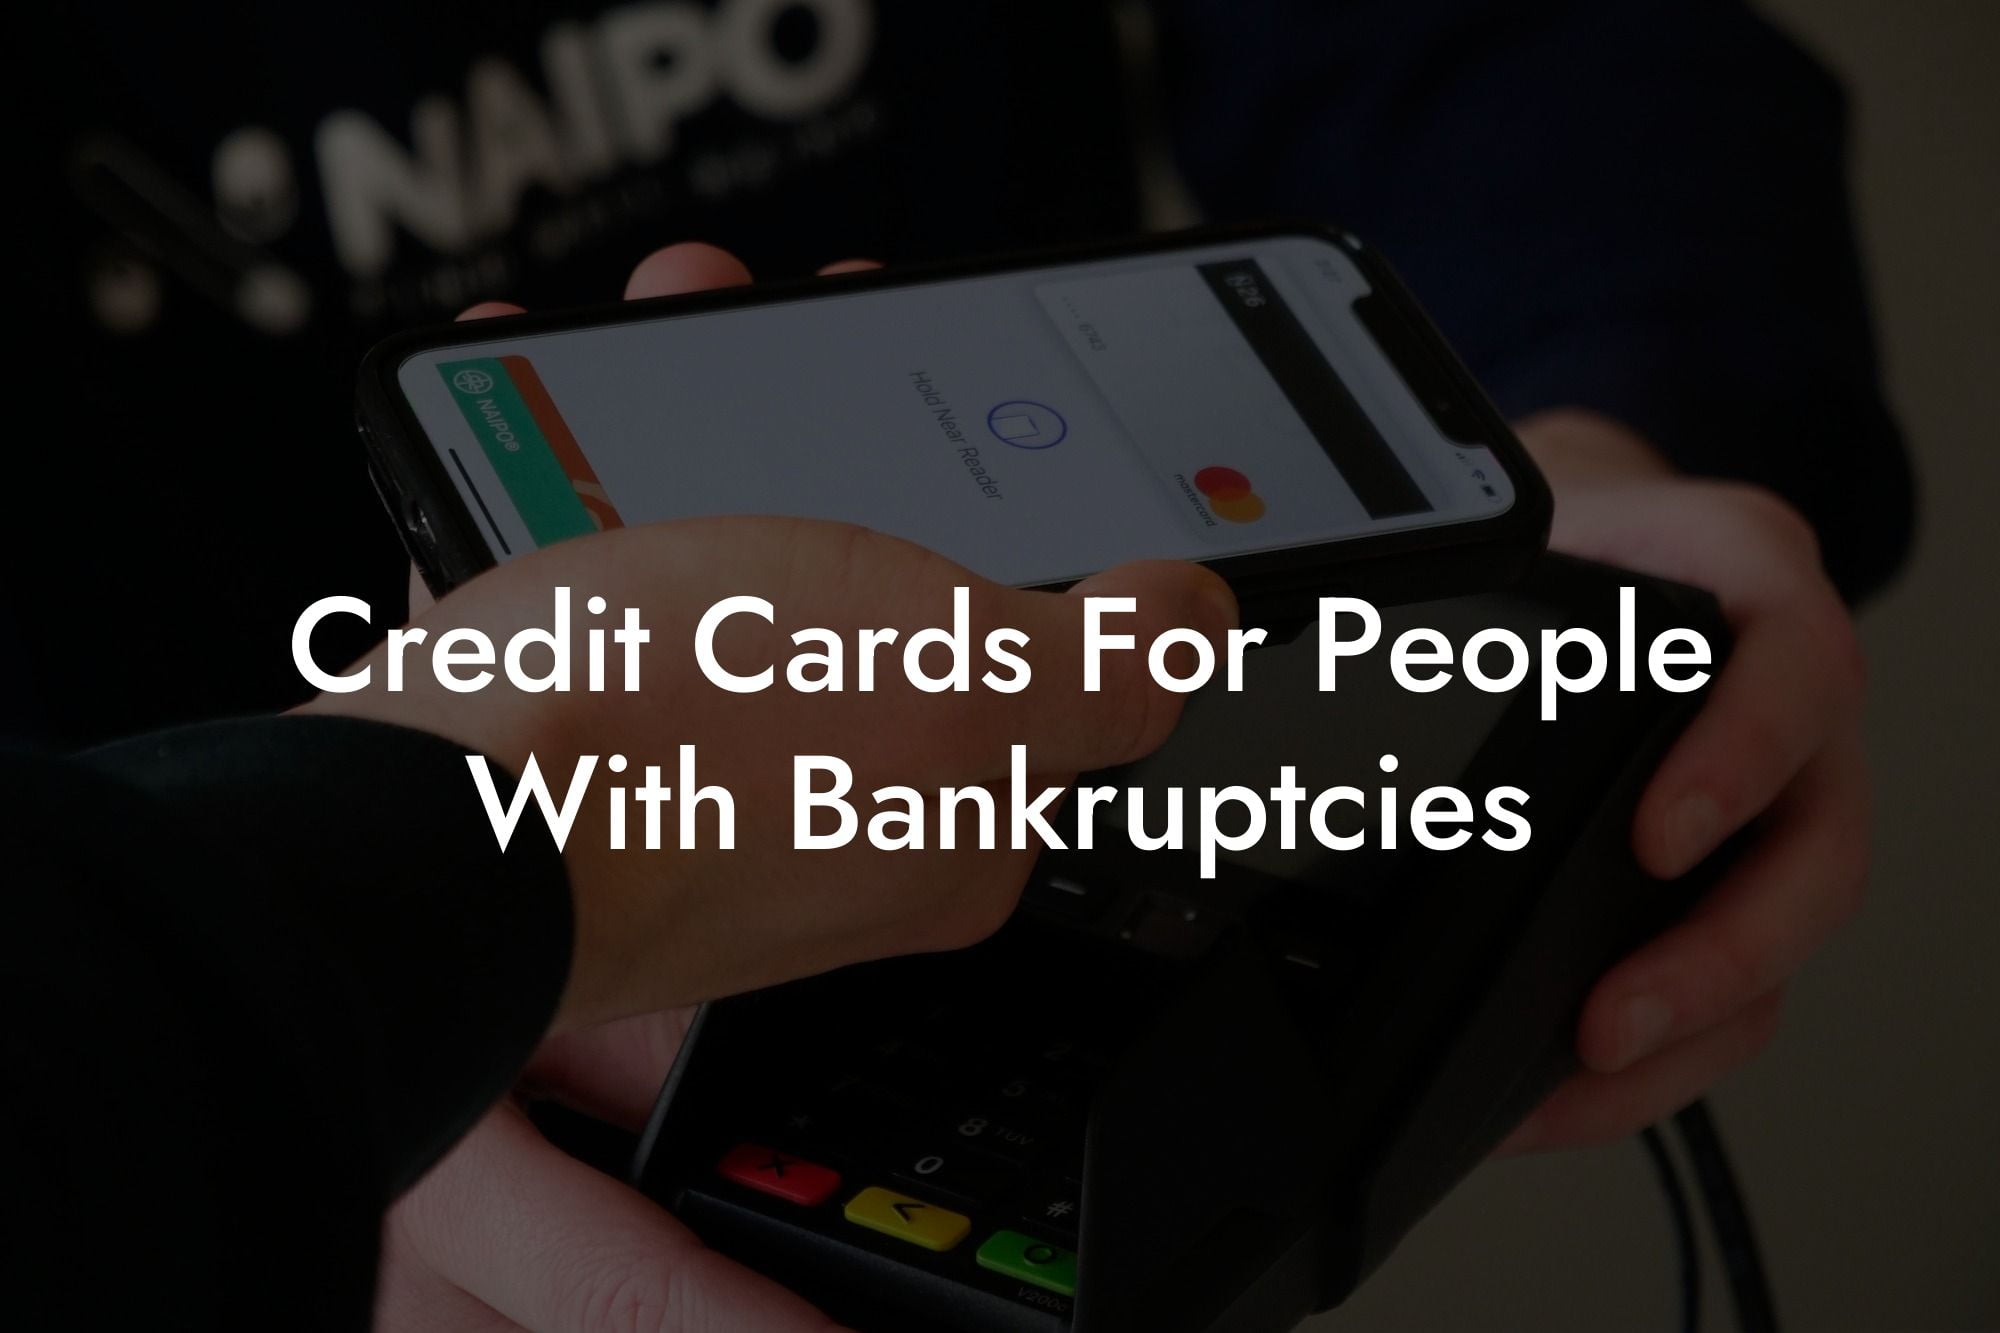 Credit Cards For People With Bankruptcies